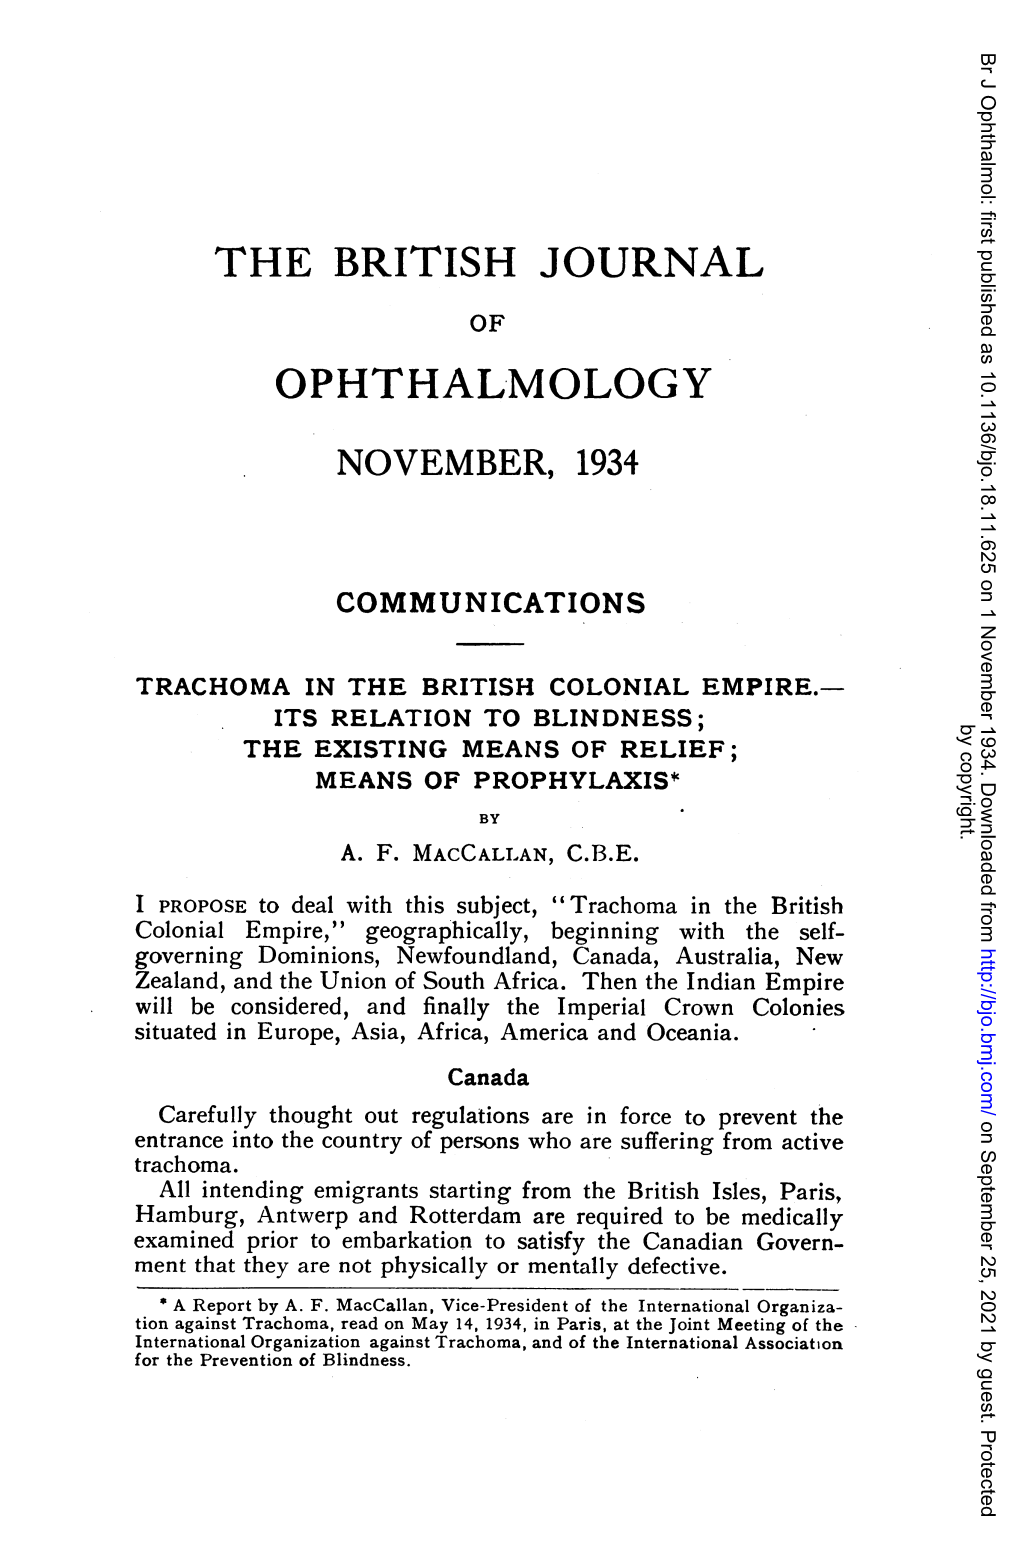 Trachoma in the British Colonial Empire.—Its